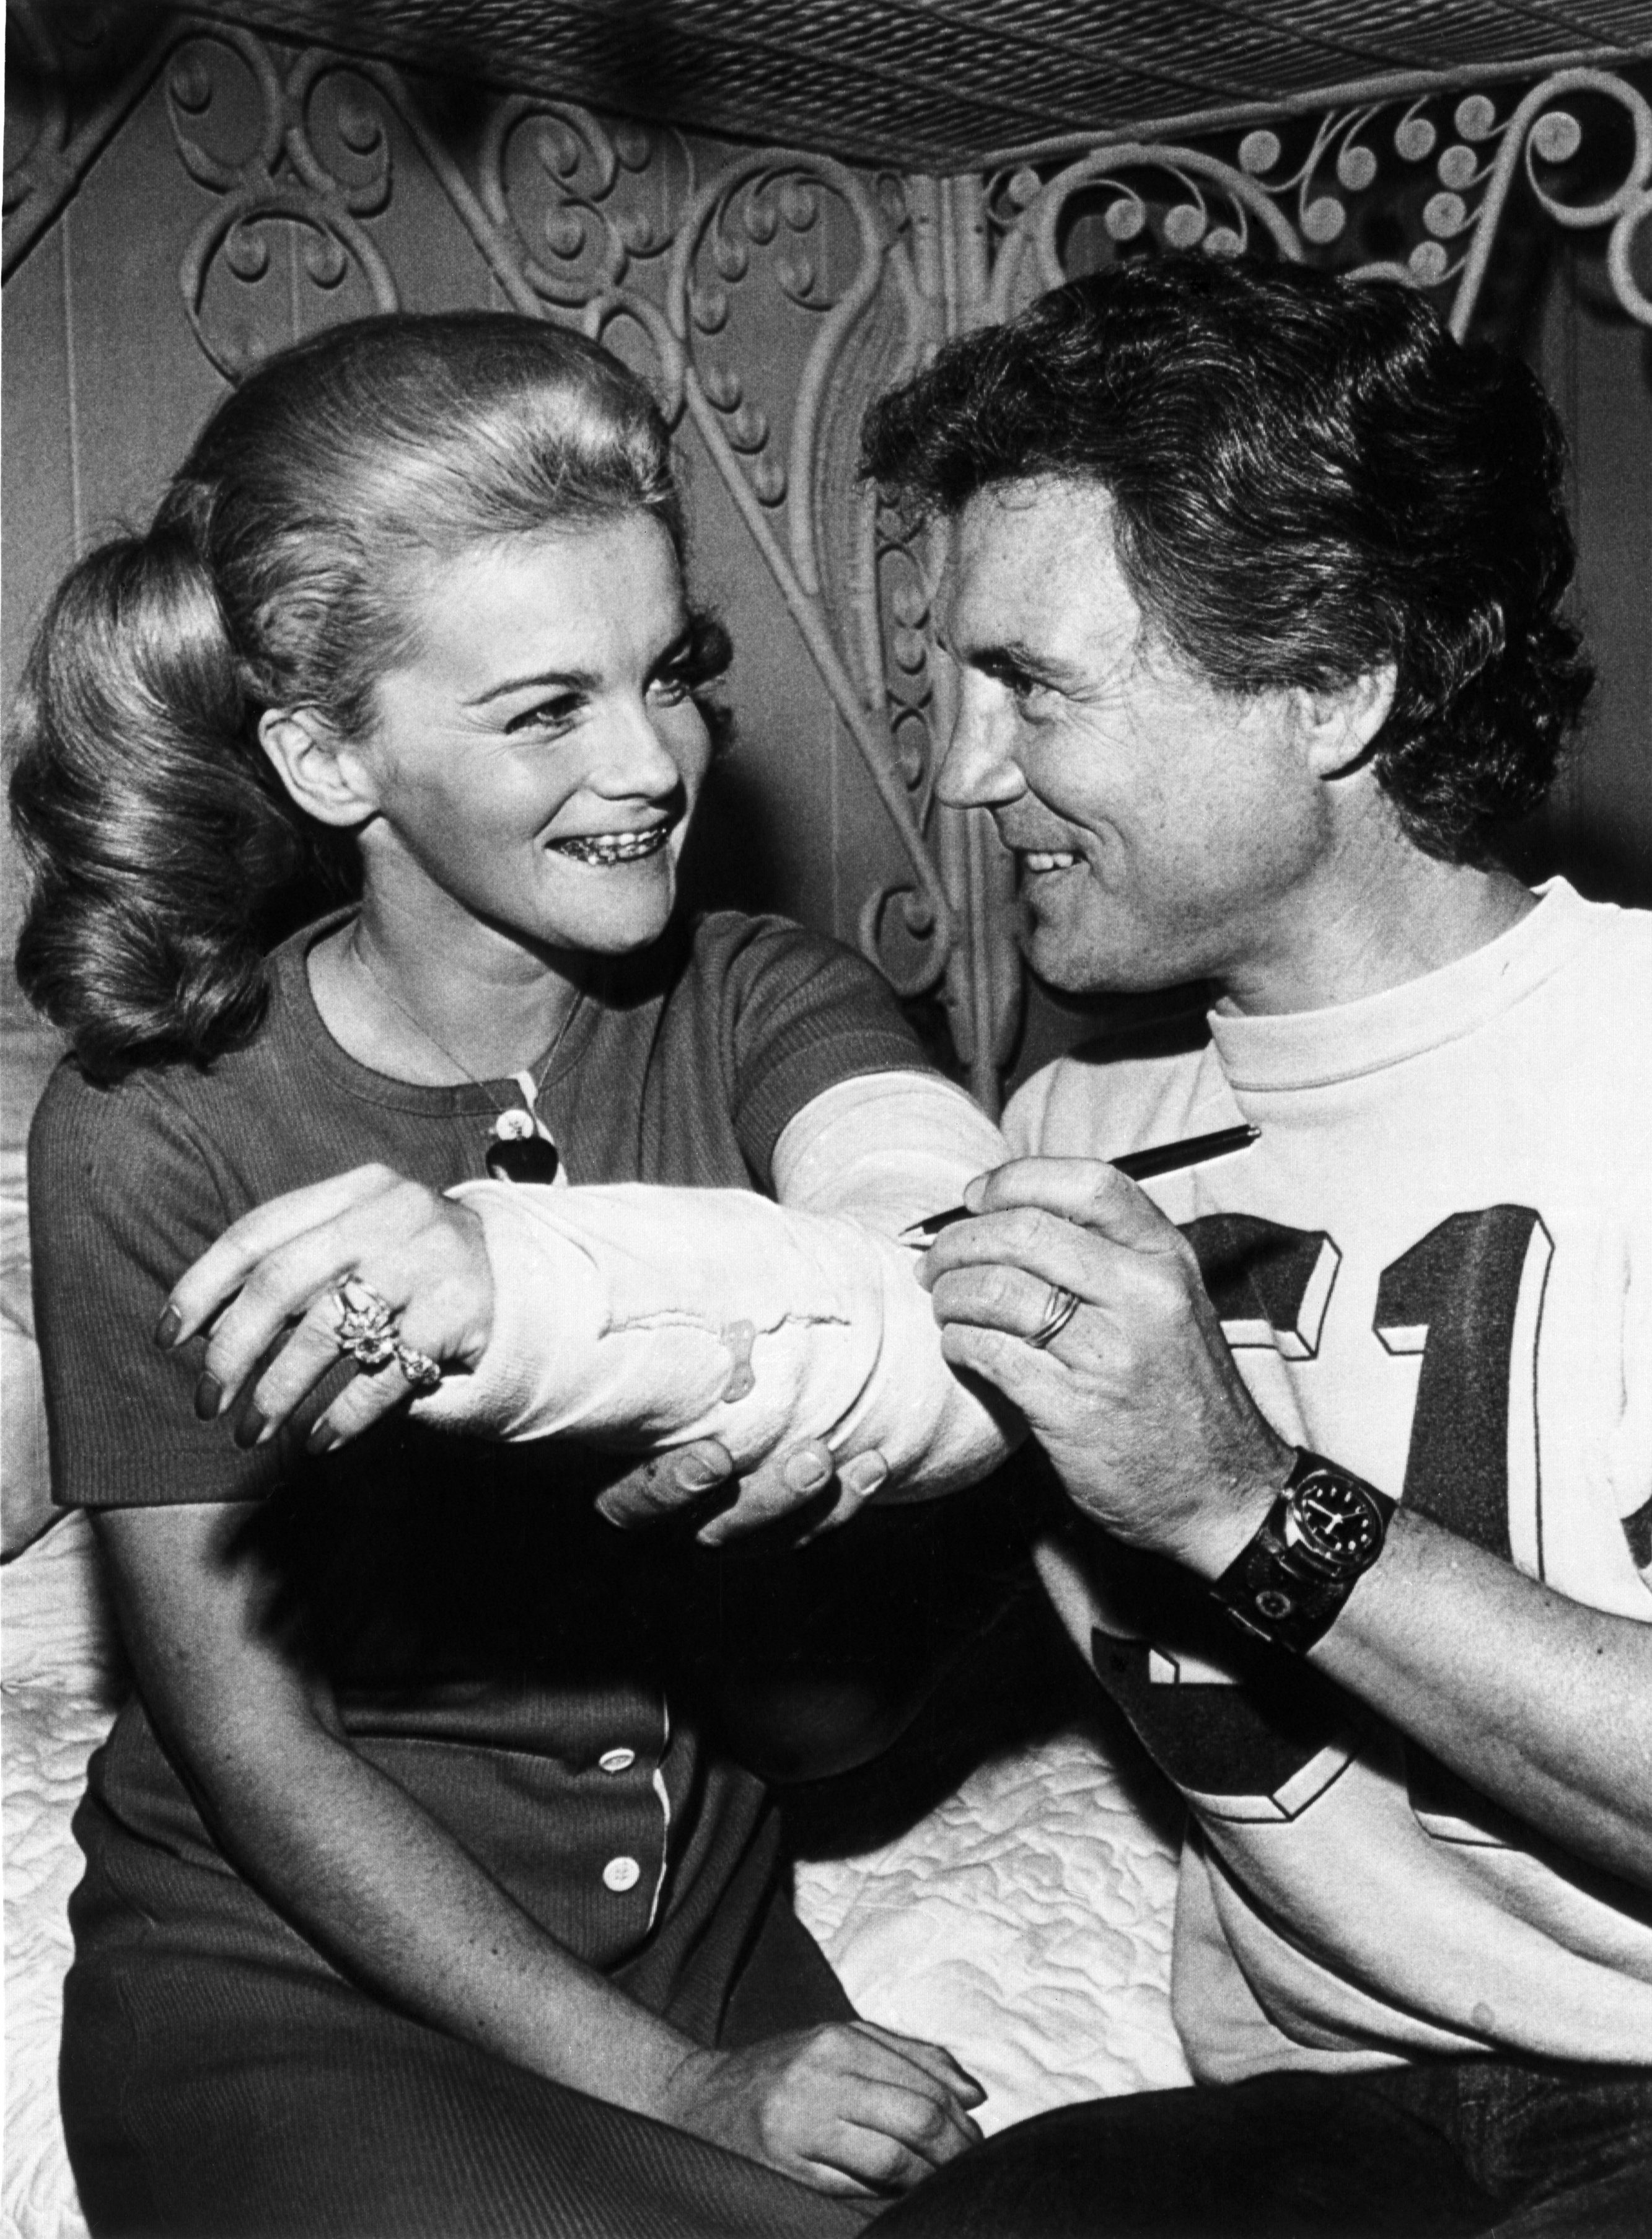 Ann-Margret after suffering a near fatal accident in a fall from a platform during her act in Lake Tahoe, has the cast on her broken left arm signed by her spouse, Roger Smith. | Source: Getty Images